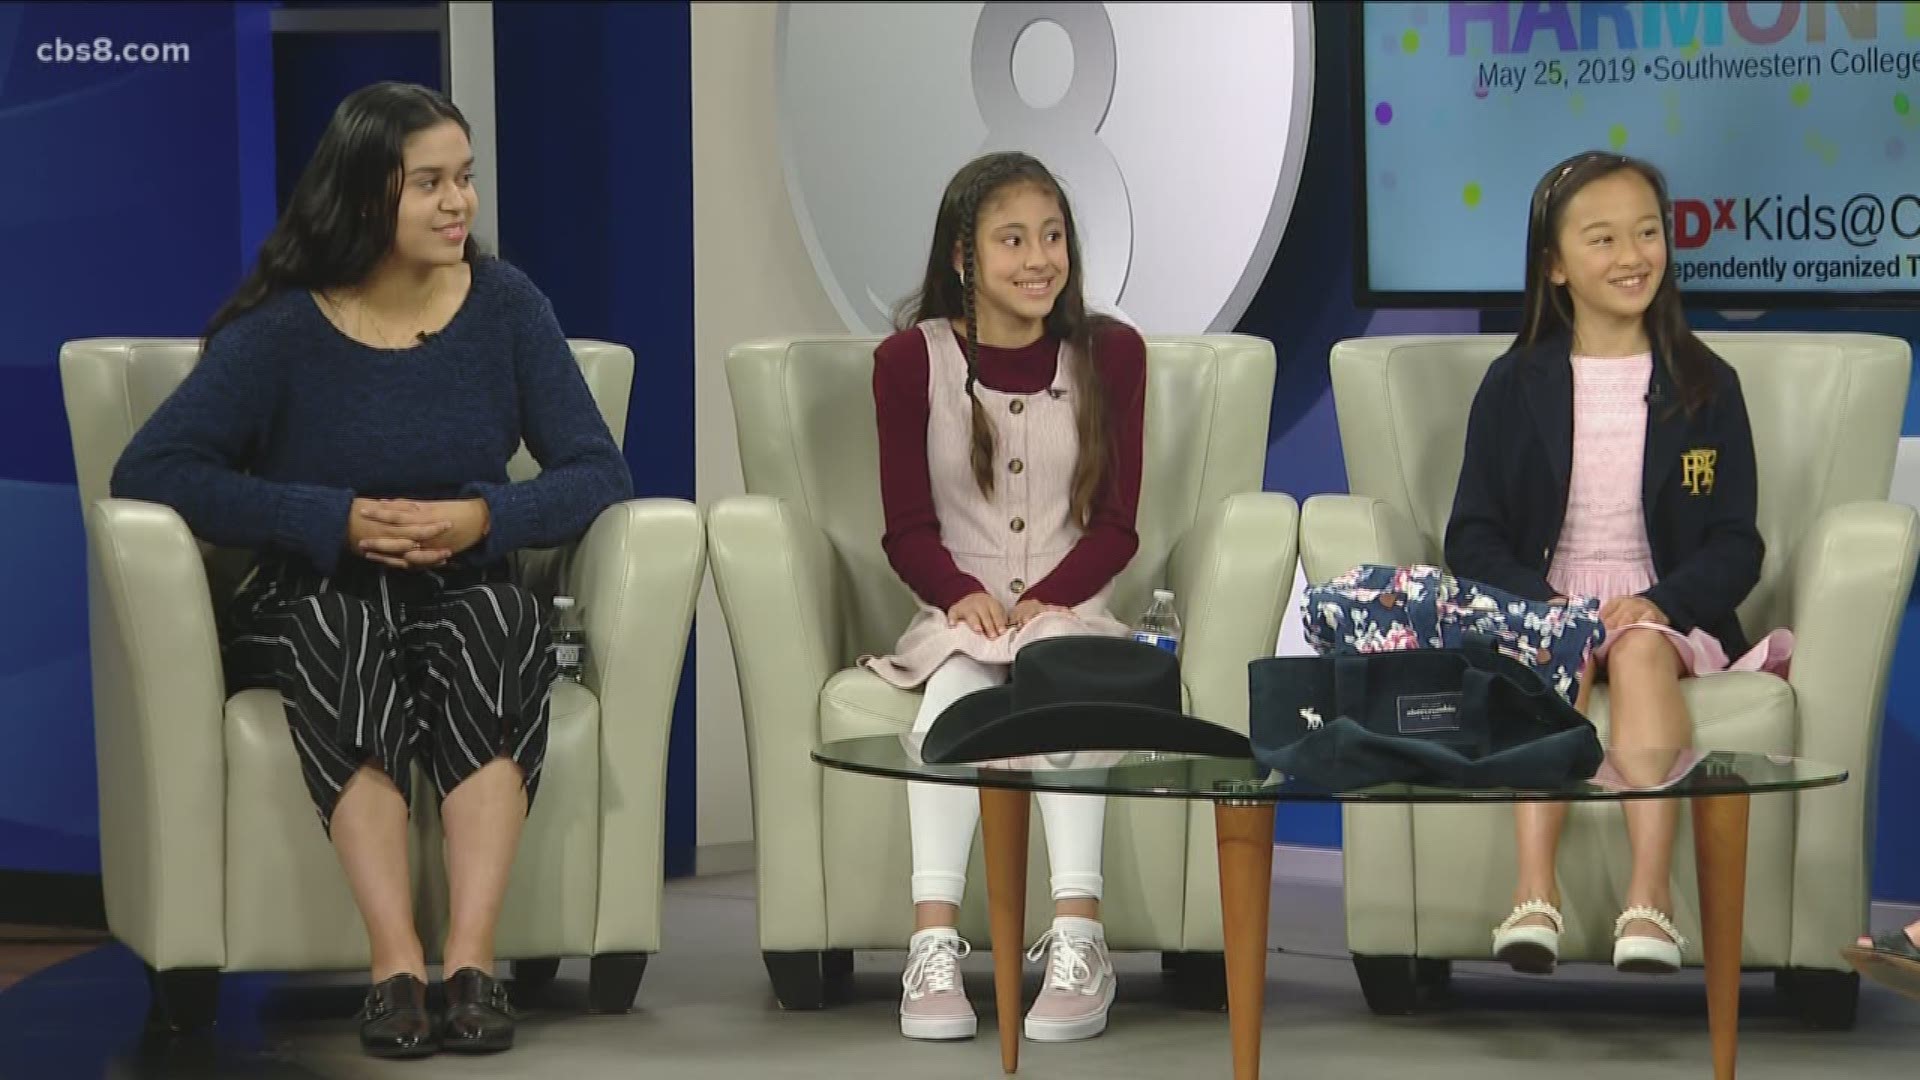 Vianney Marin, Samantha Garcia and Healin Lee dropped by to talk about Saturday’s event and they even gave previews of their talks.